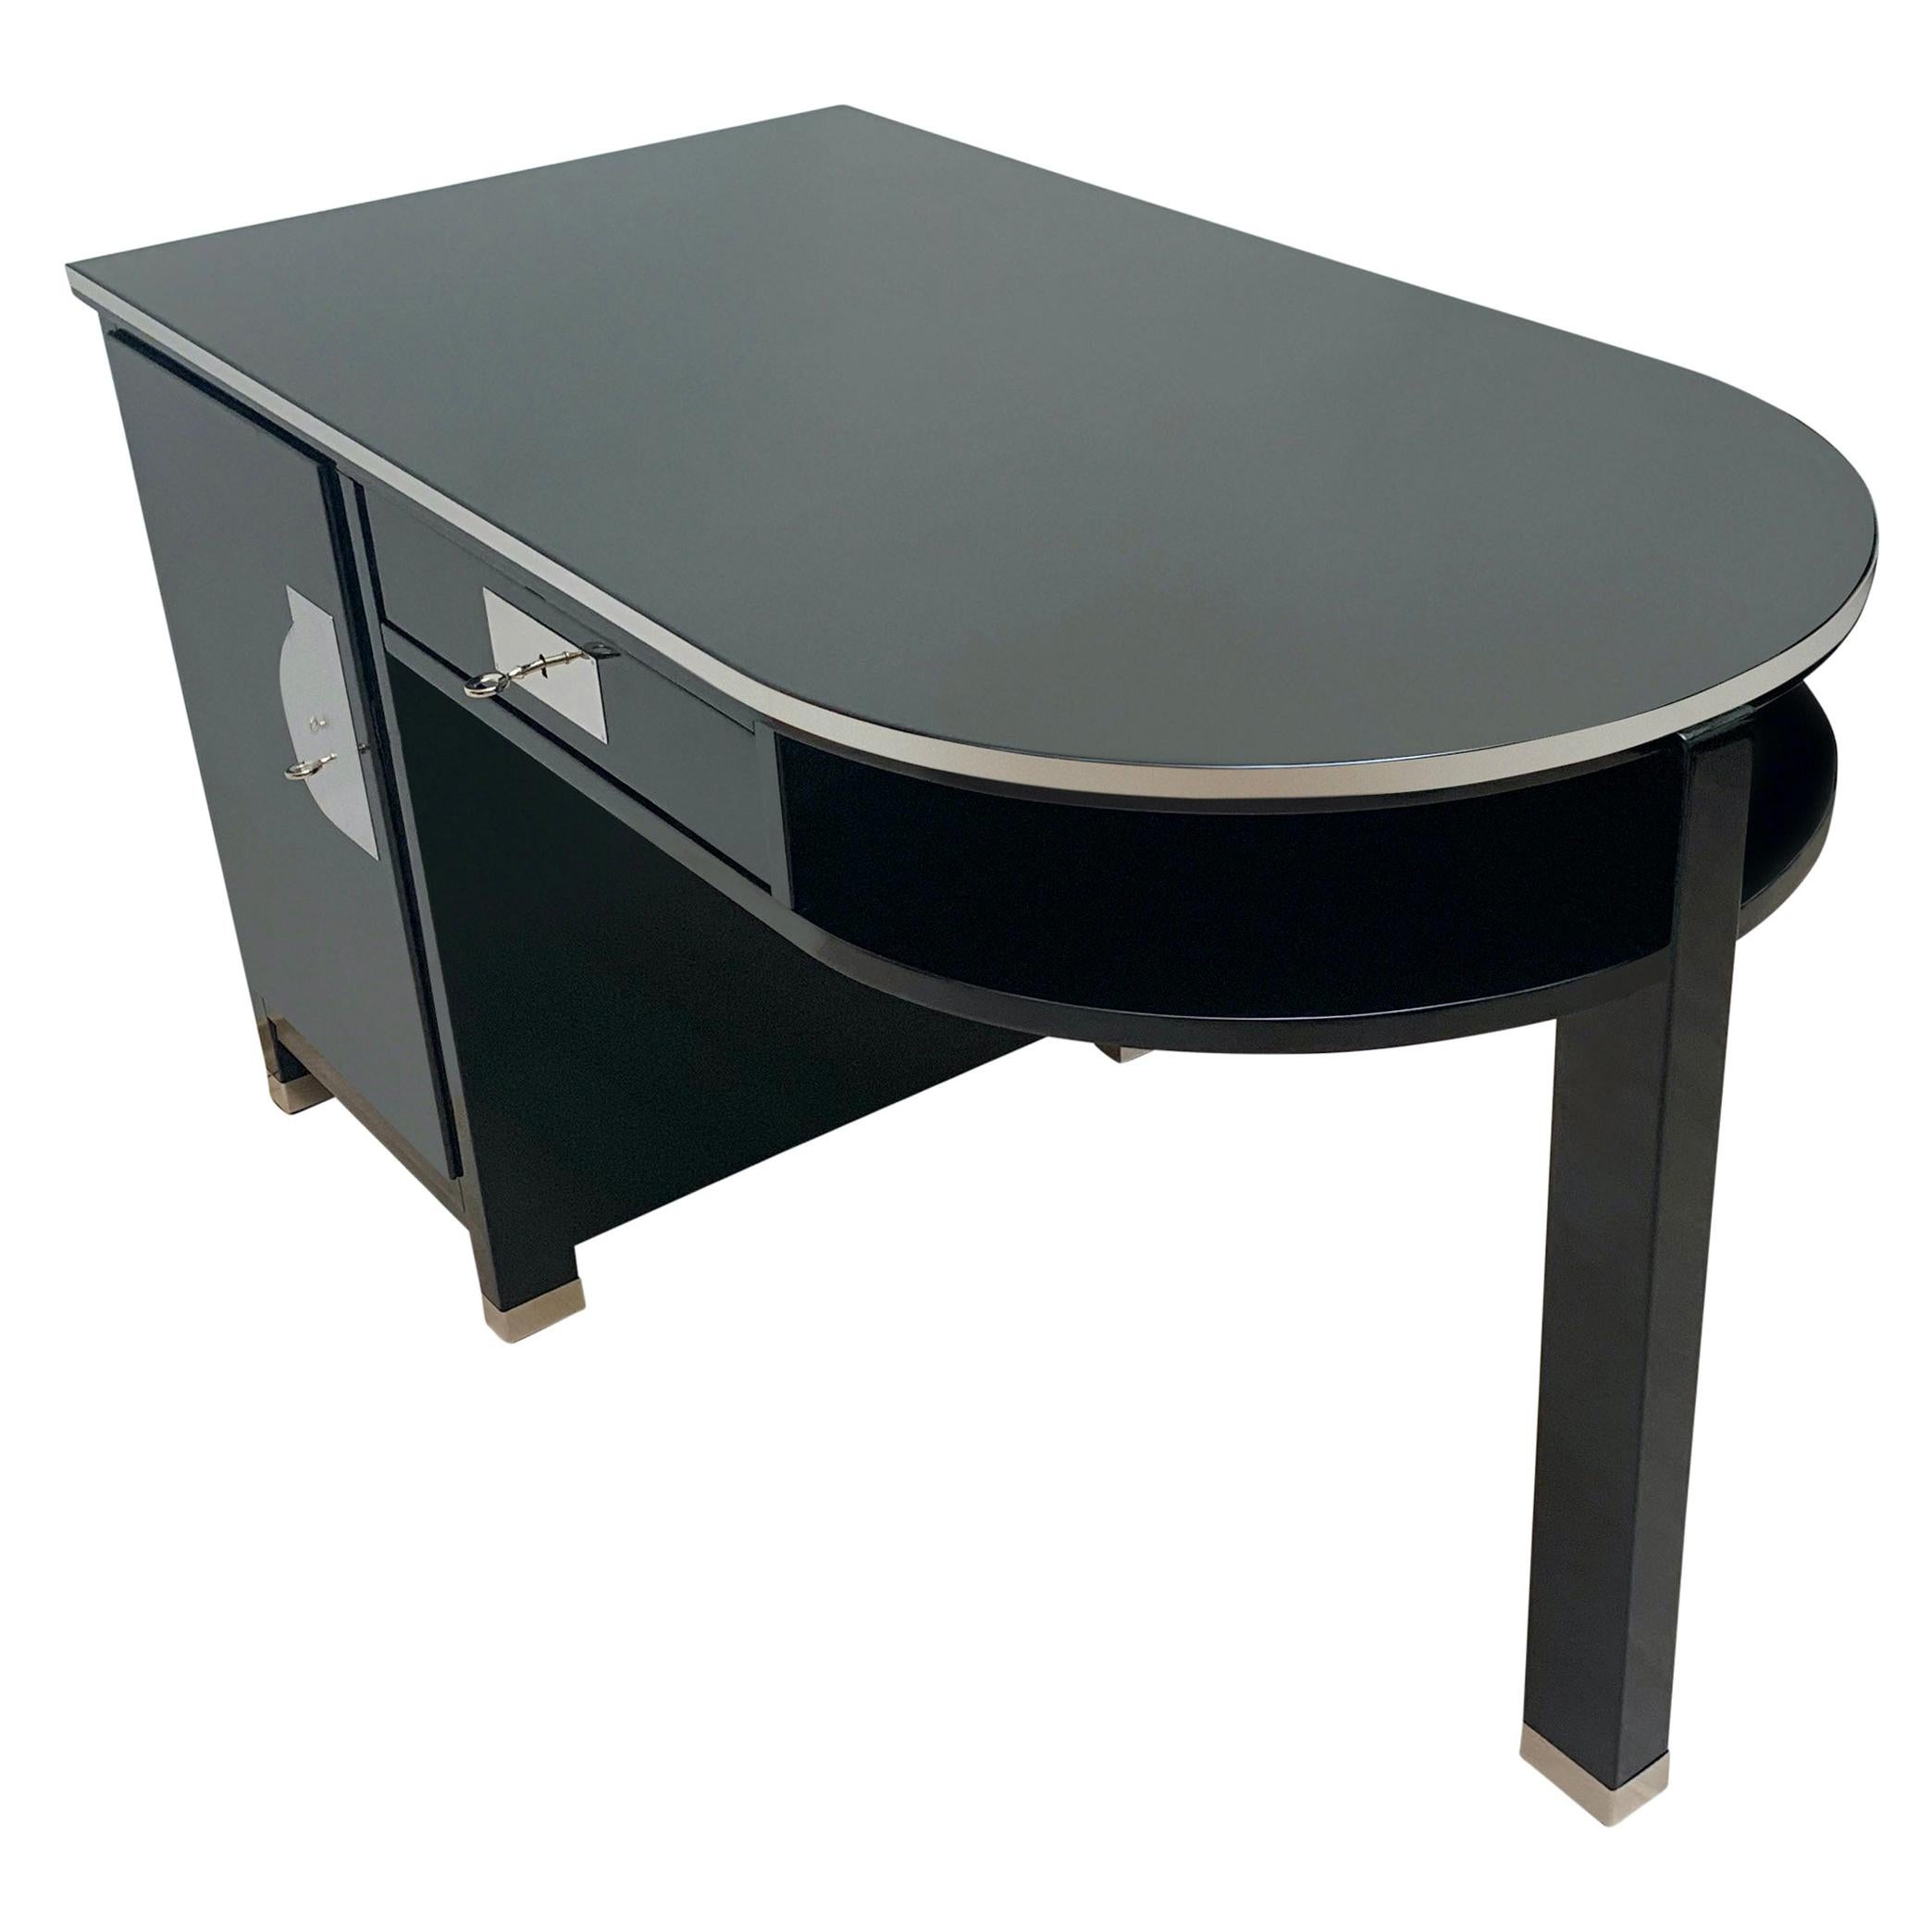 Very elegant, small and functional Art Deco writing desk from France, circa 1930.

Black piano lacquer on hardwood veneered on softwood.
High-gloss polished decorative metal strips around the plate and all five legs.
Nickel-plated handle on the